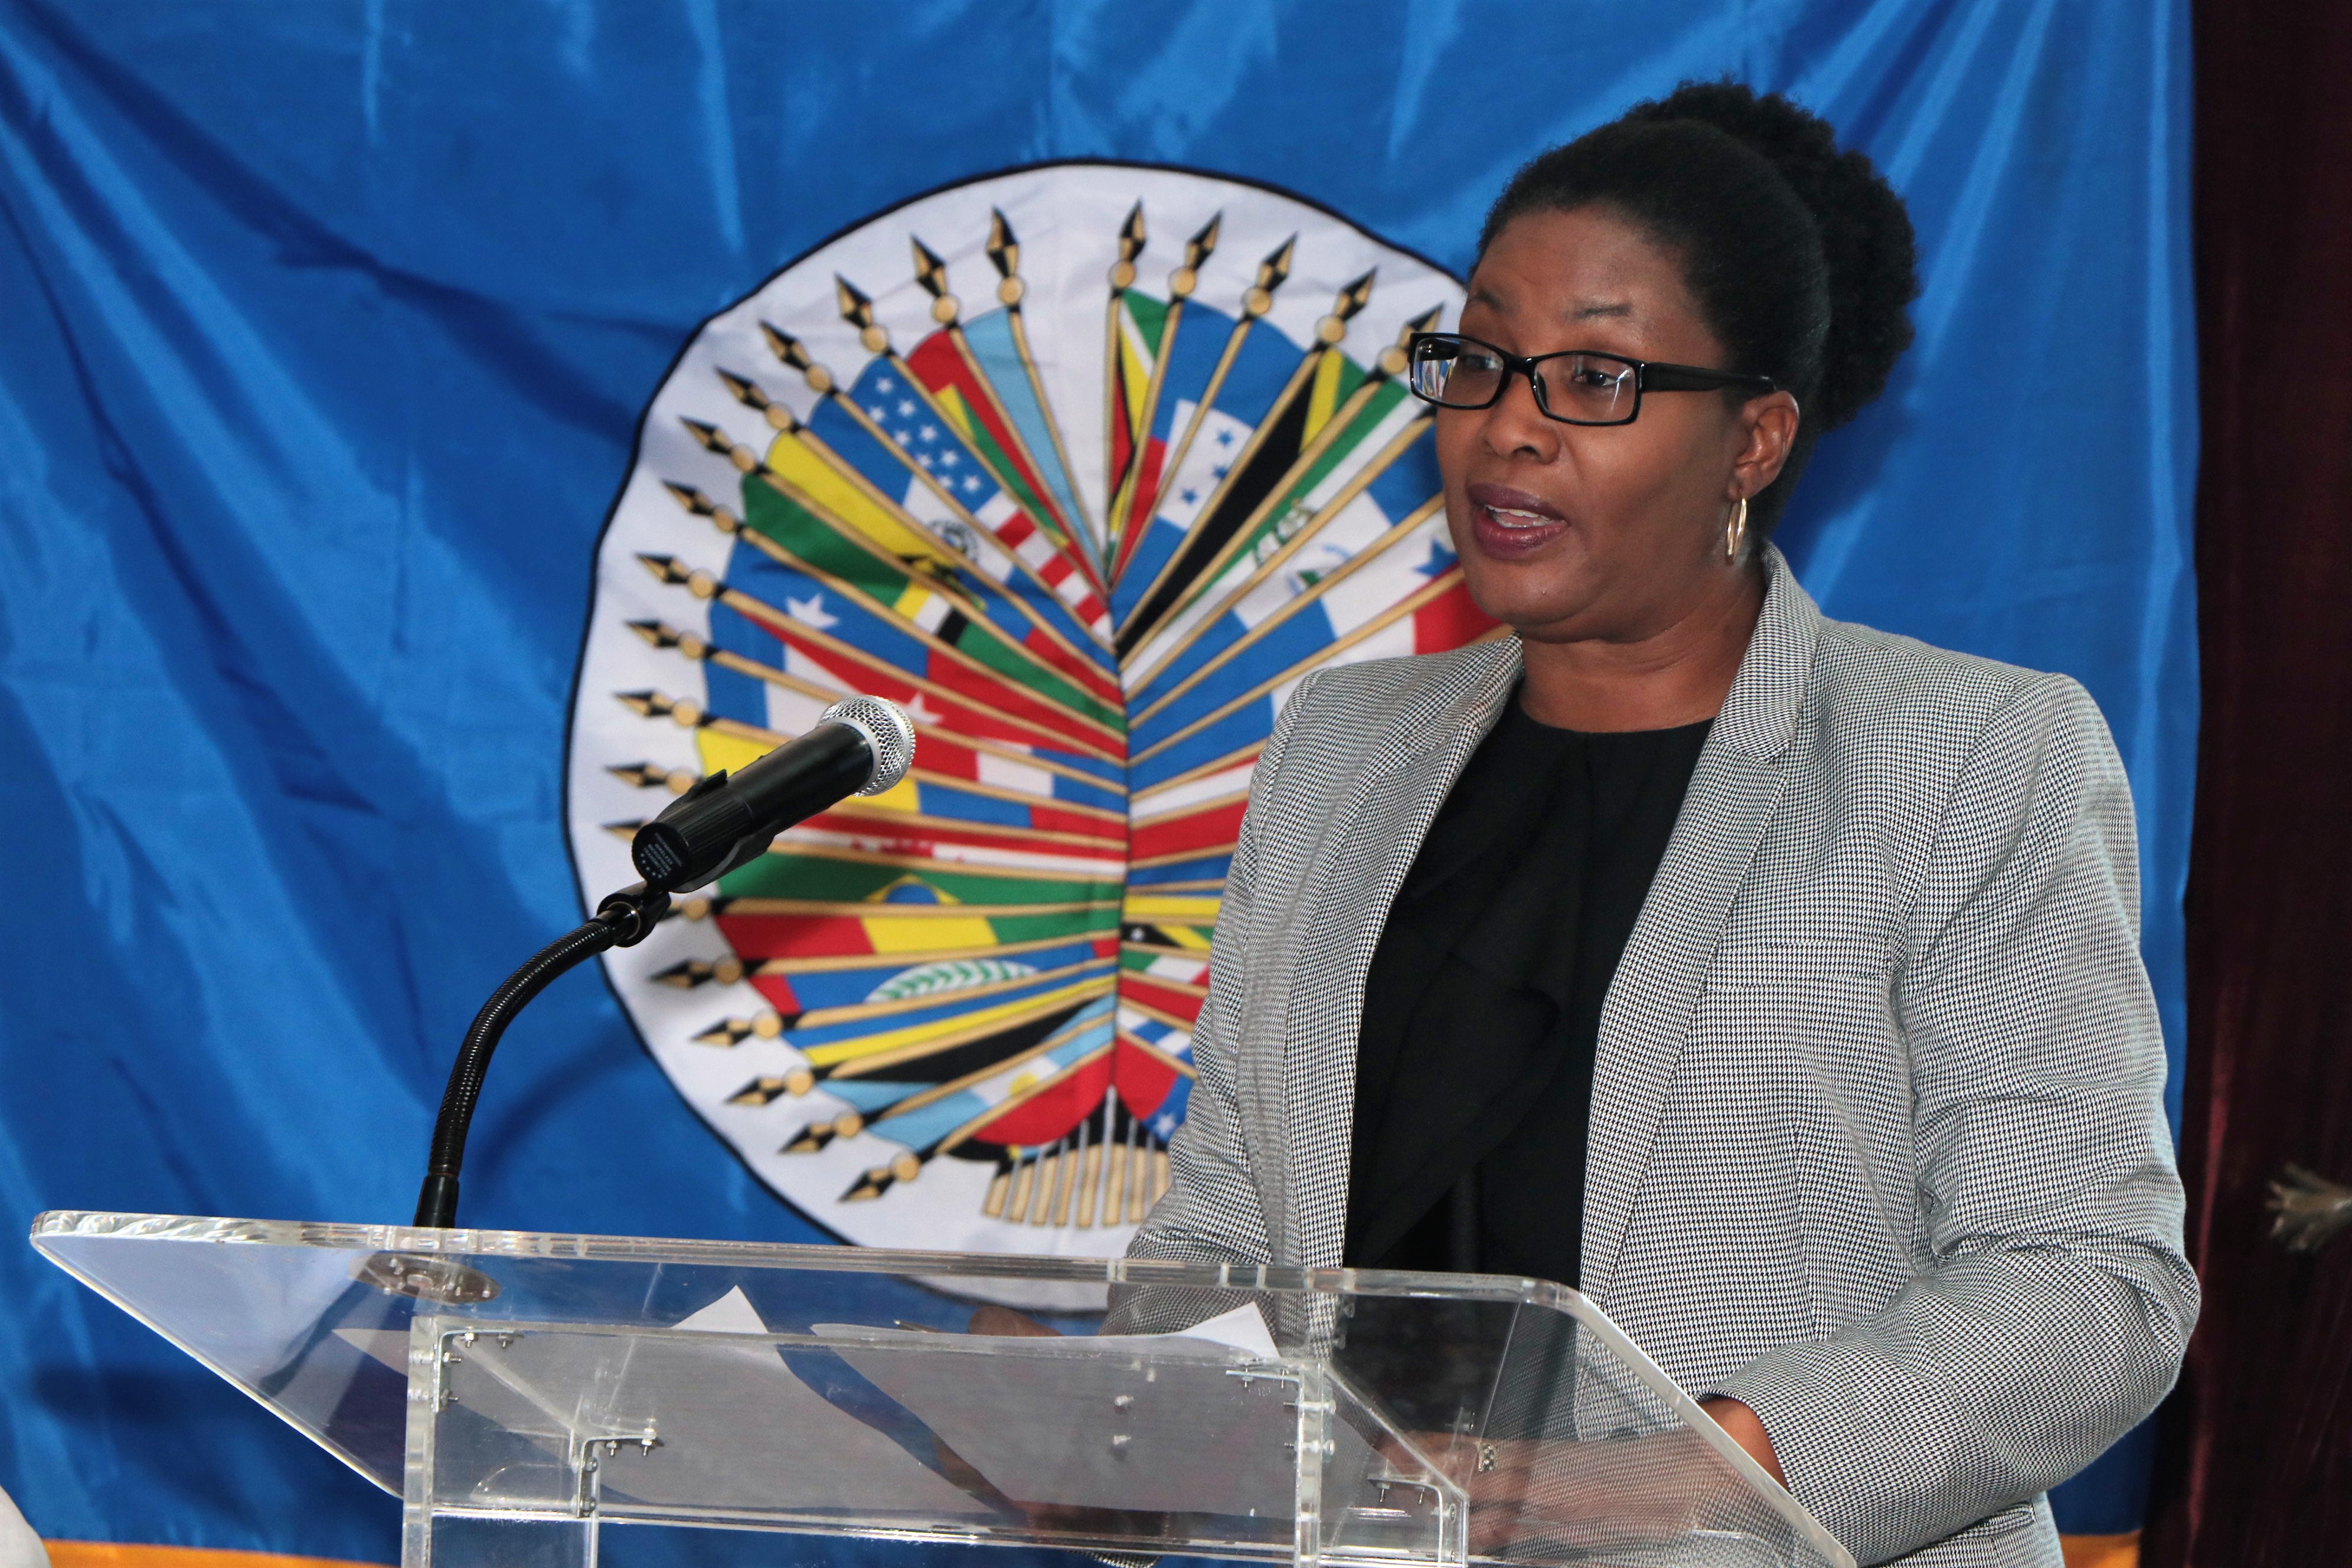 Officials tasked with the control of illicit drugs participated in a National Seminar on Synthetic Drugs and NPS Identification and controls jointly hosted by The Bahamas’ Ministry of National Security and The Organization of American States.(January 30, 2019)